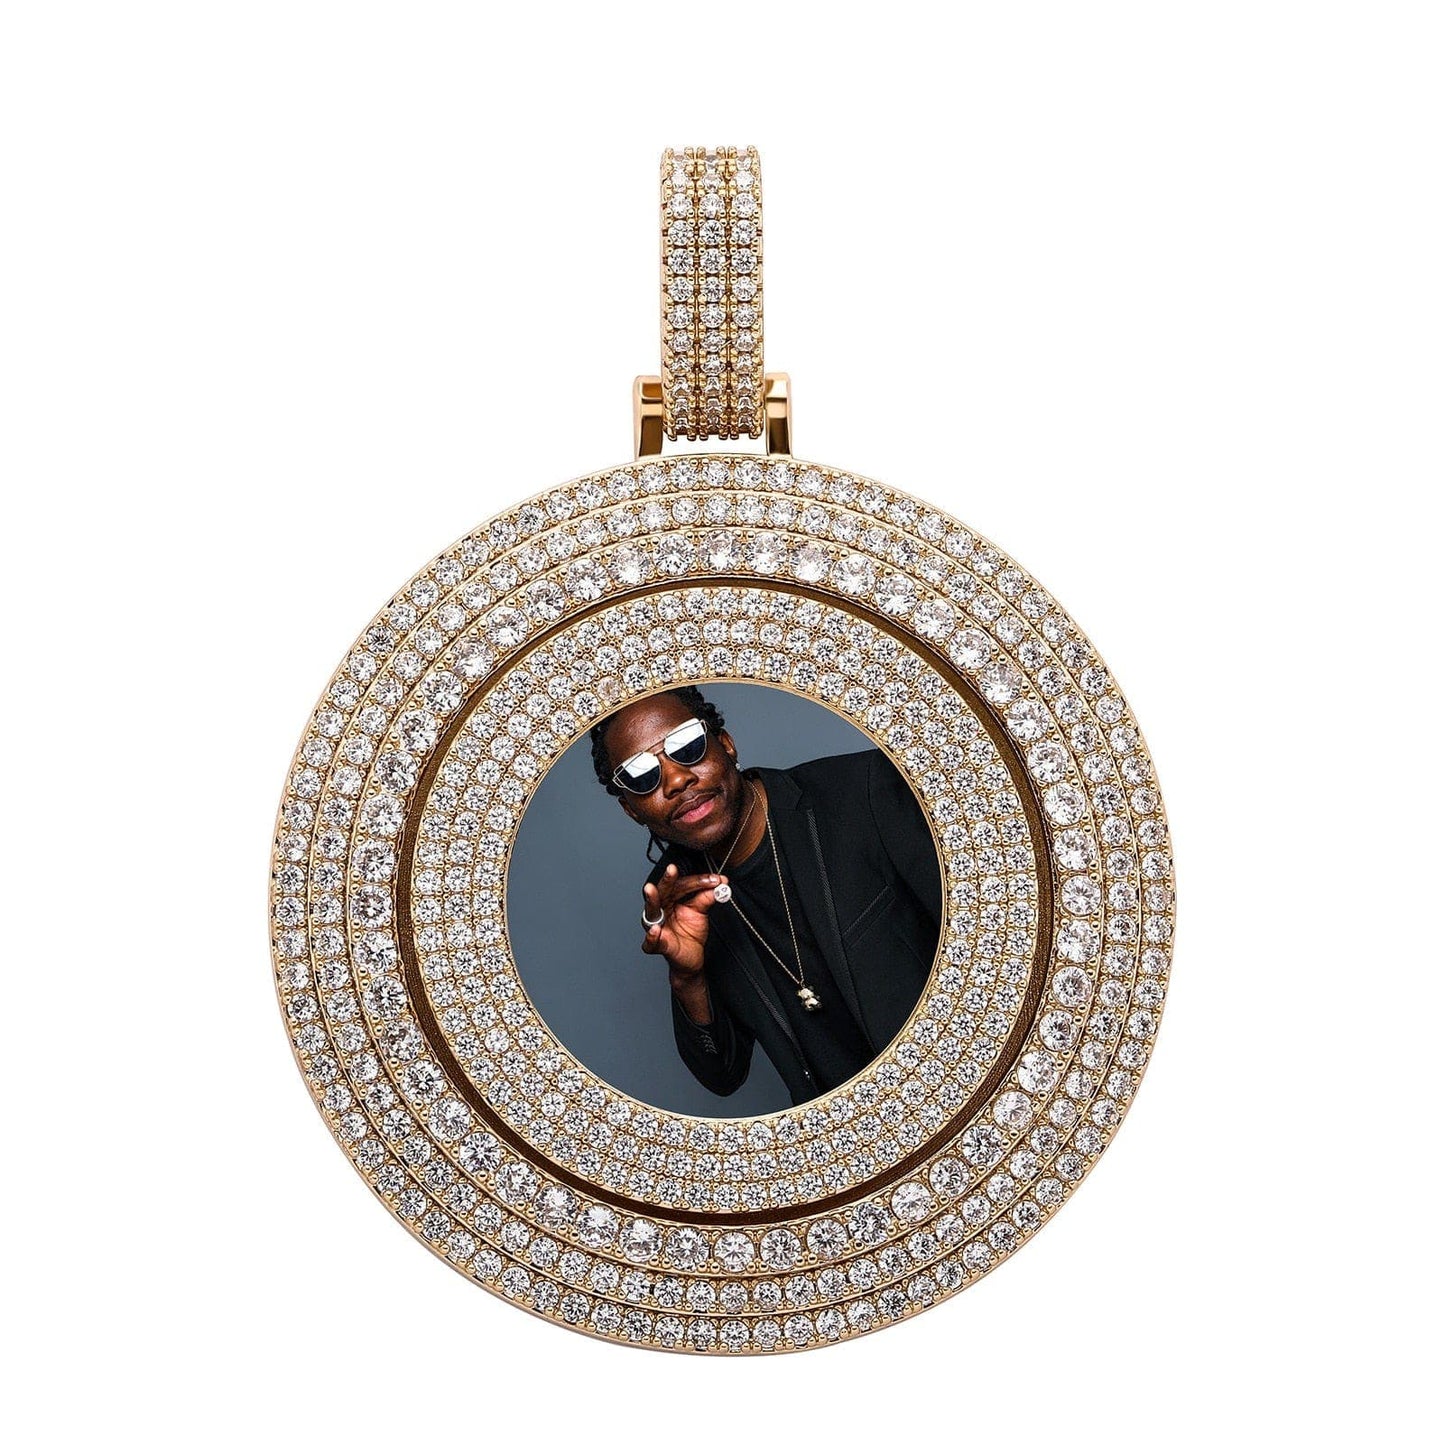 VVS Jewelry hip hop jewelry VVS Jewelry Thicc Fully Iced Custom Photo Pendant Necklace